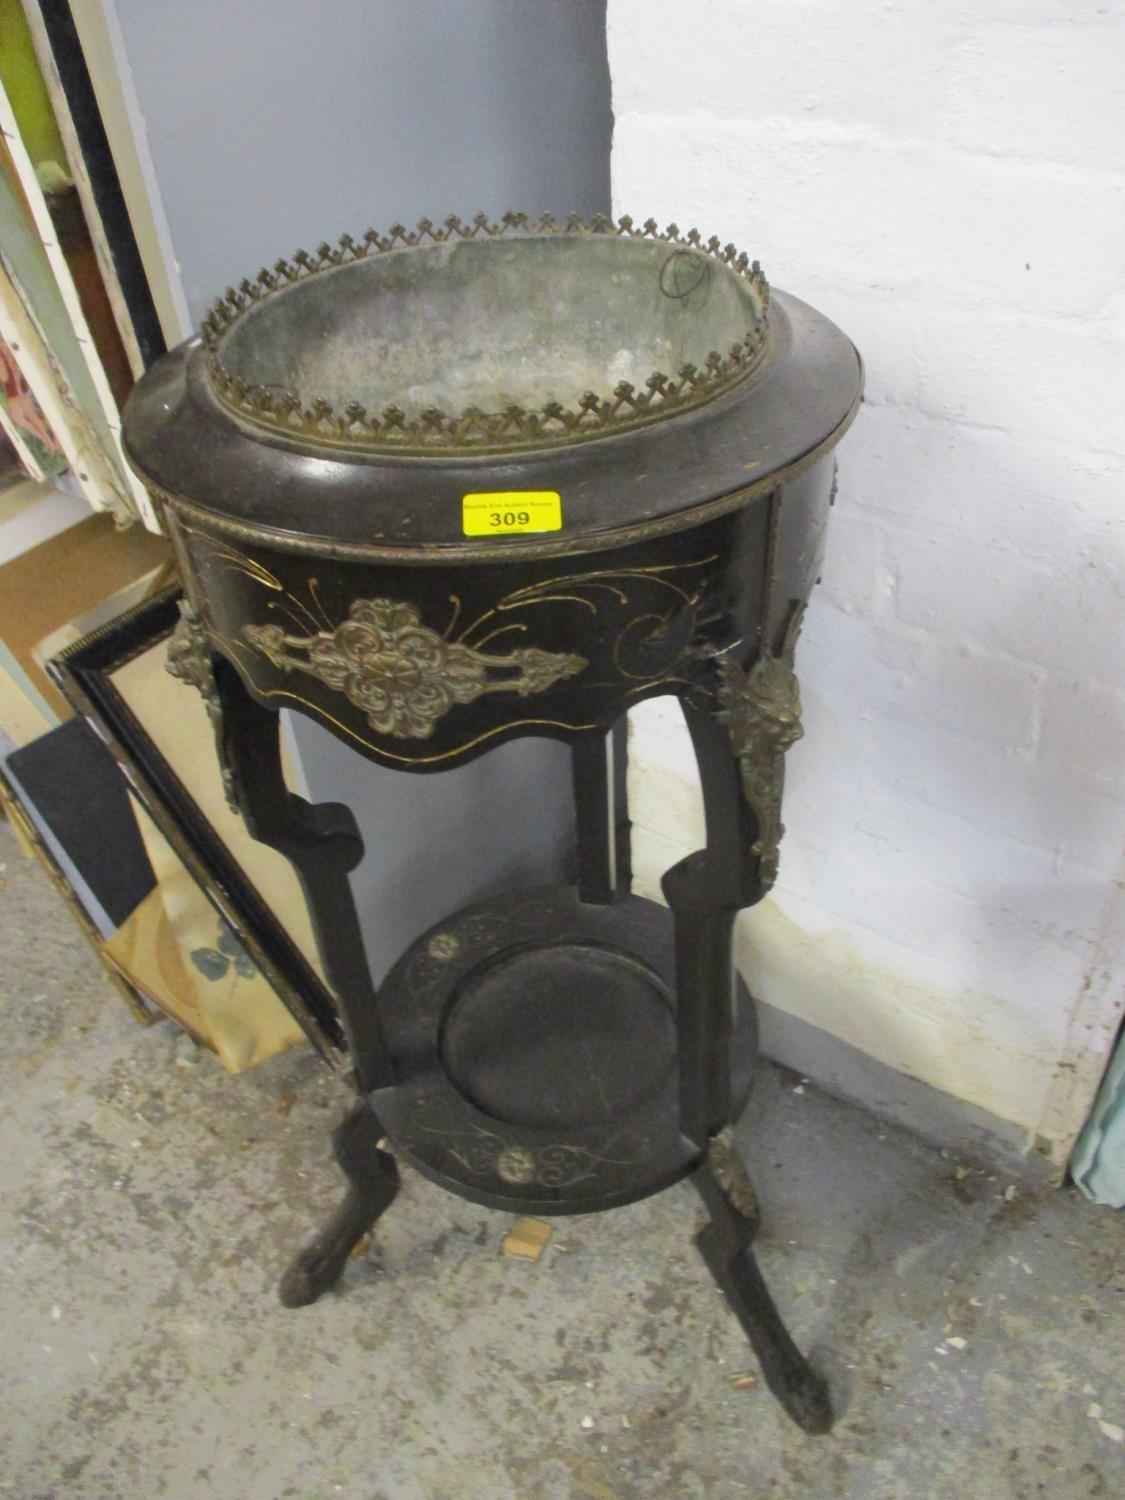 A 19th century ebonized, two tier plant stand